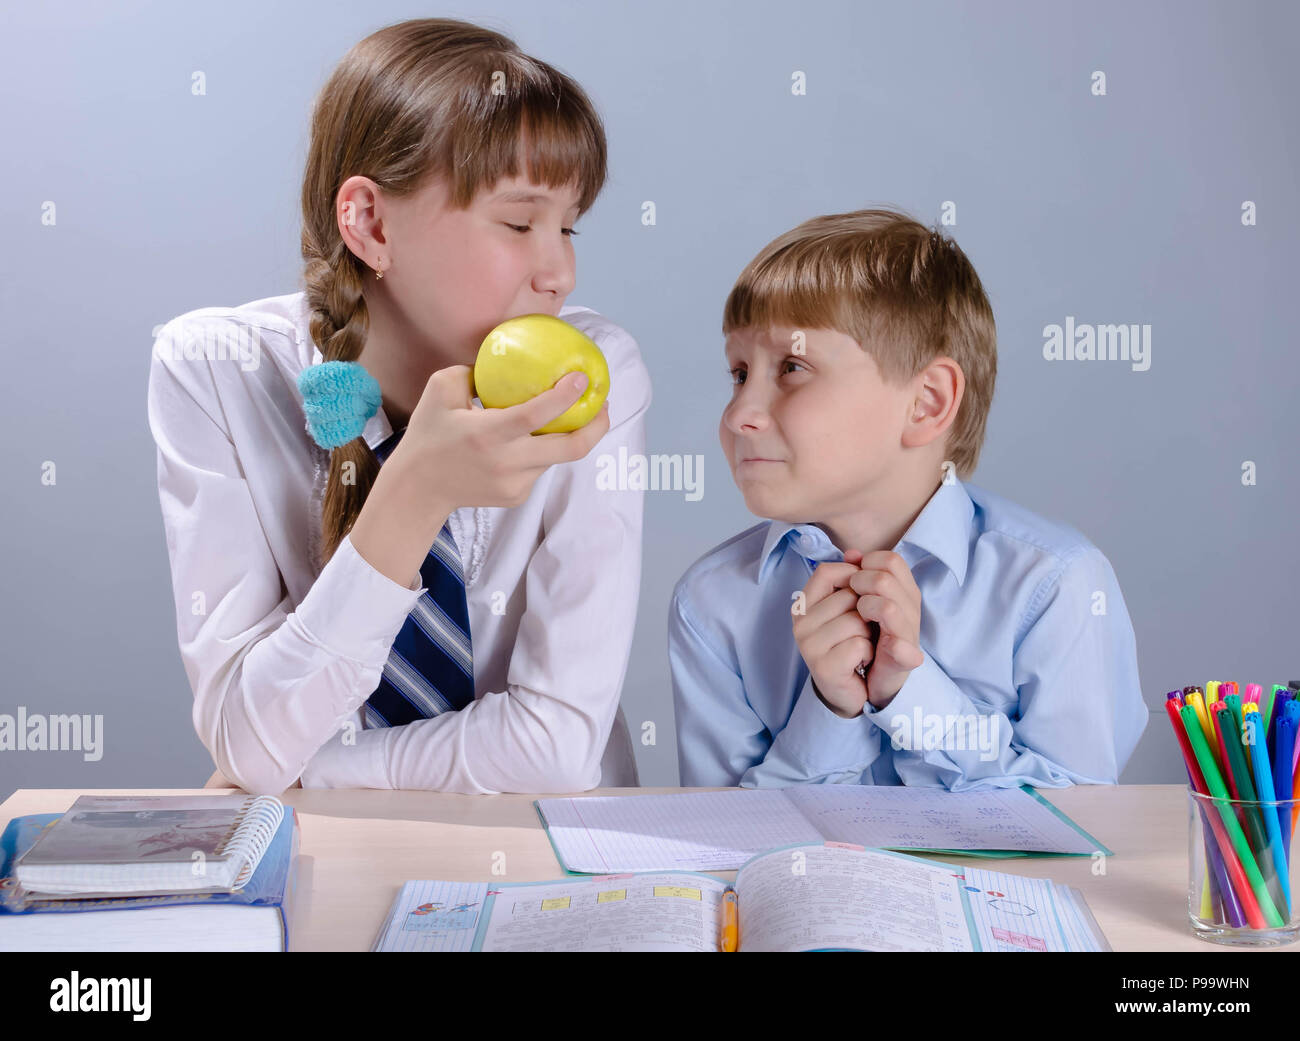 schoolchild boy and girl at a desk in the classroom Stock Photo